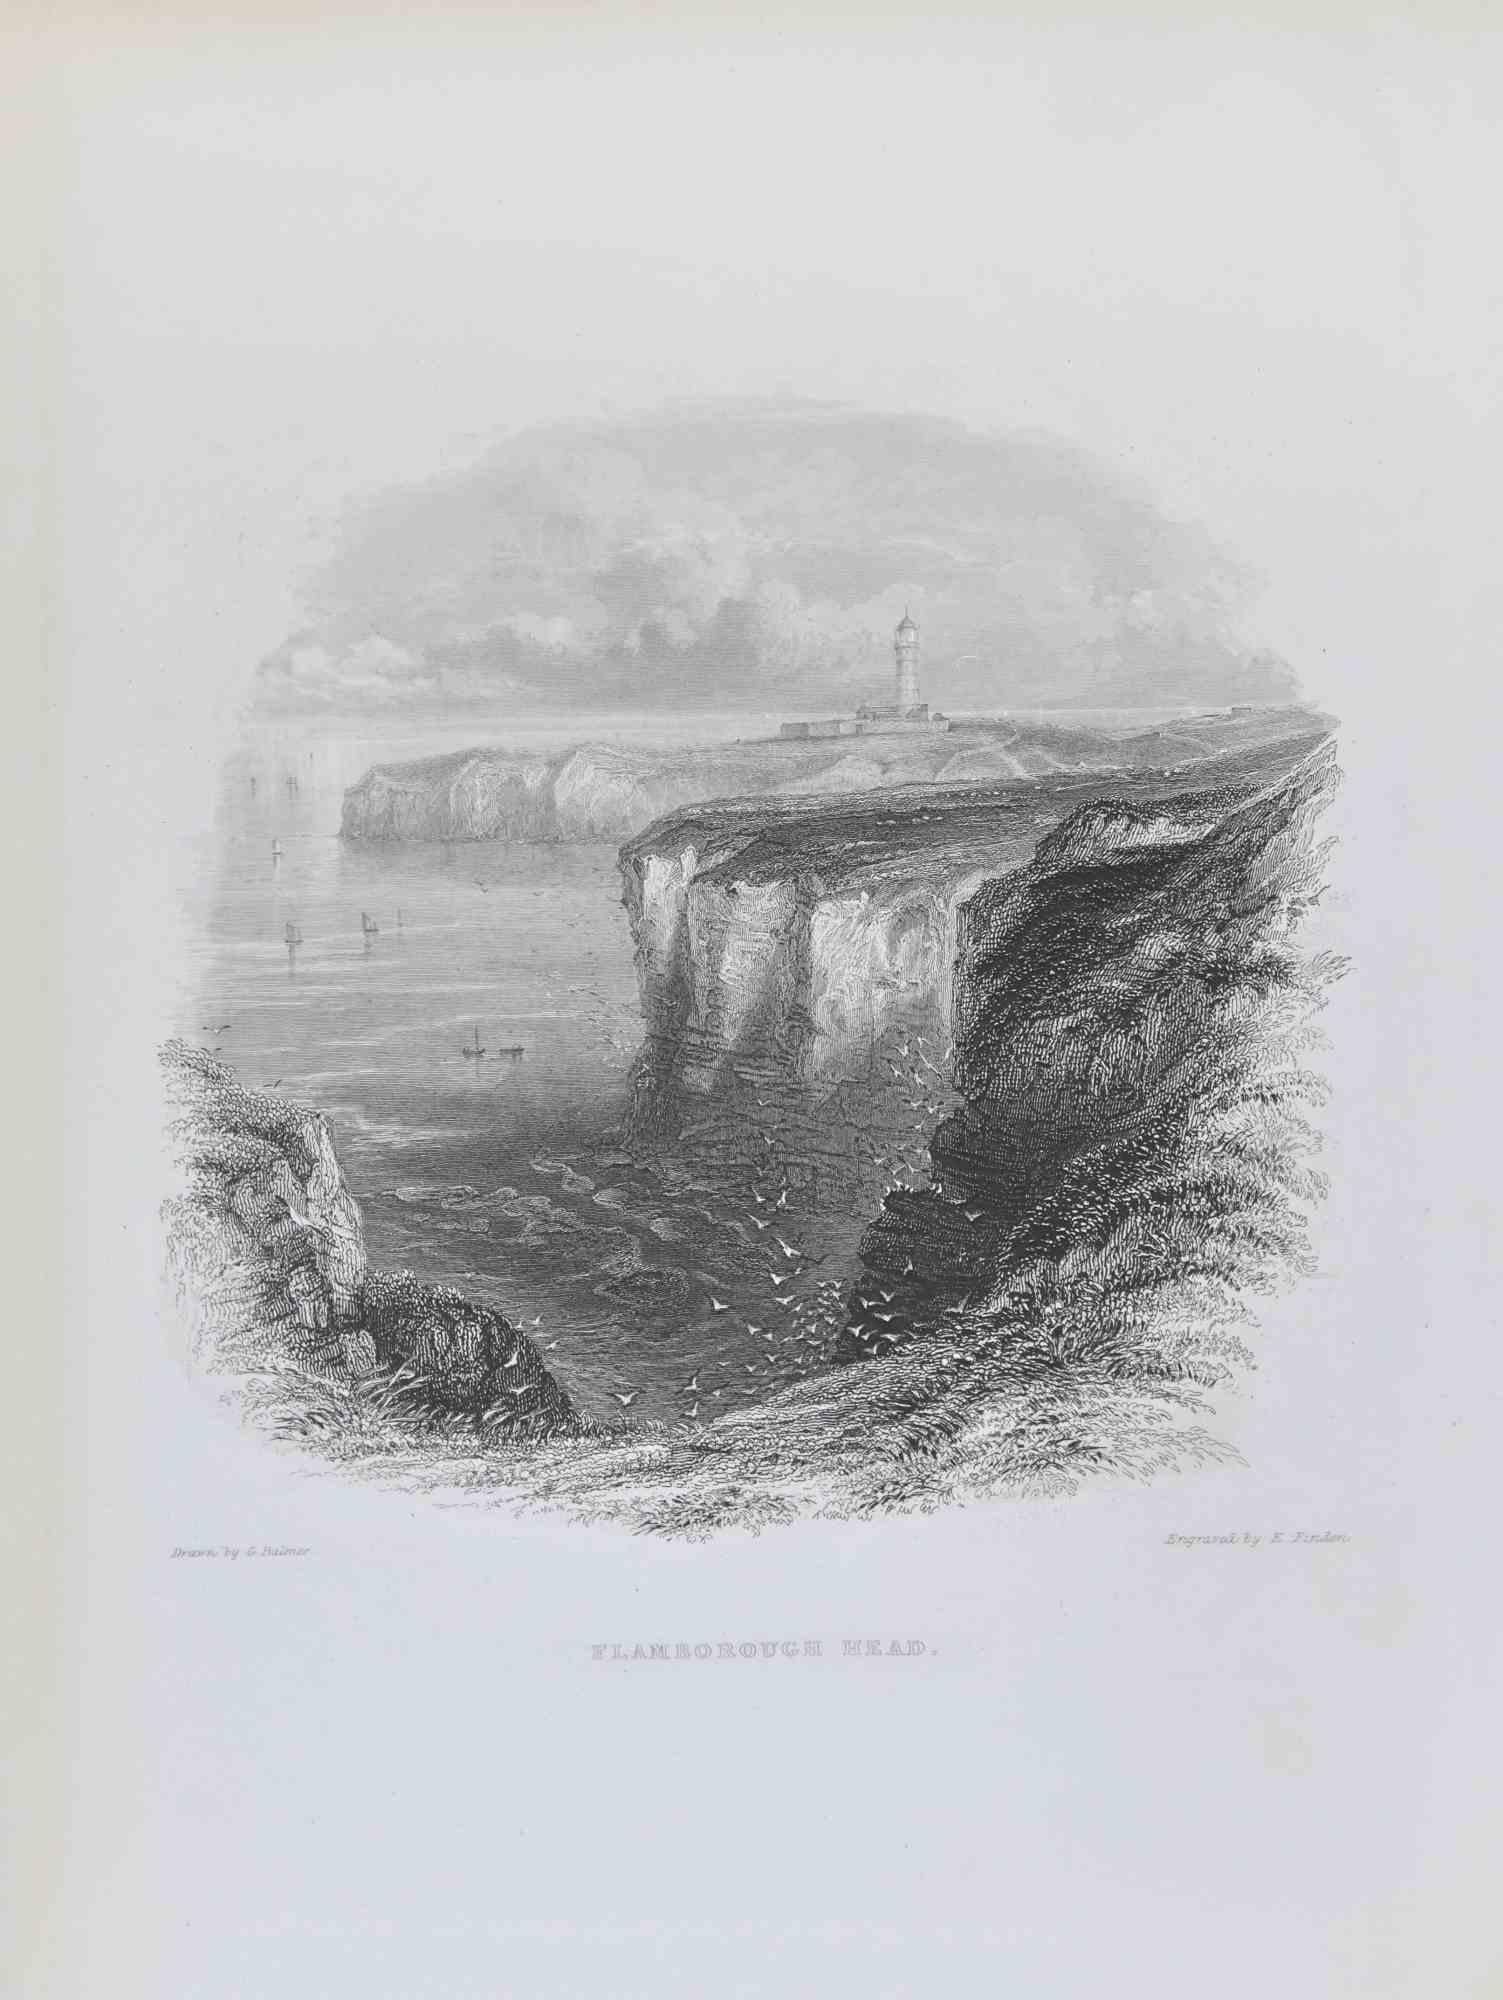 Flamborough Head is an  engraving on paper realized by E.Finden in 1838.

The artwork is in good condition.

The artwork is depicted in a well-balanced composition.
